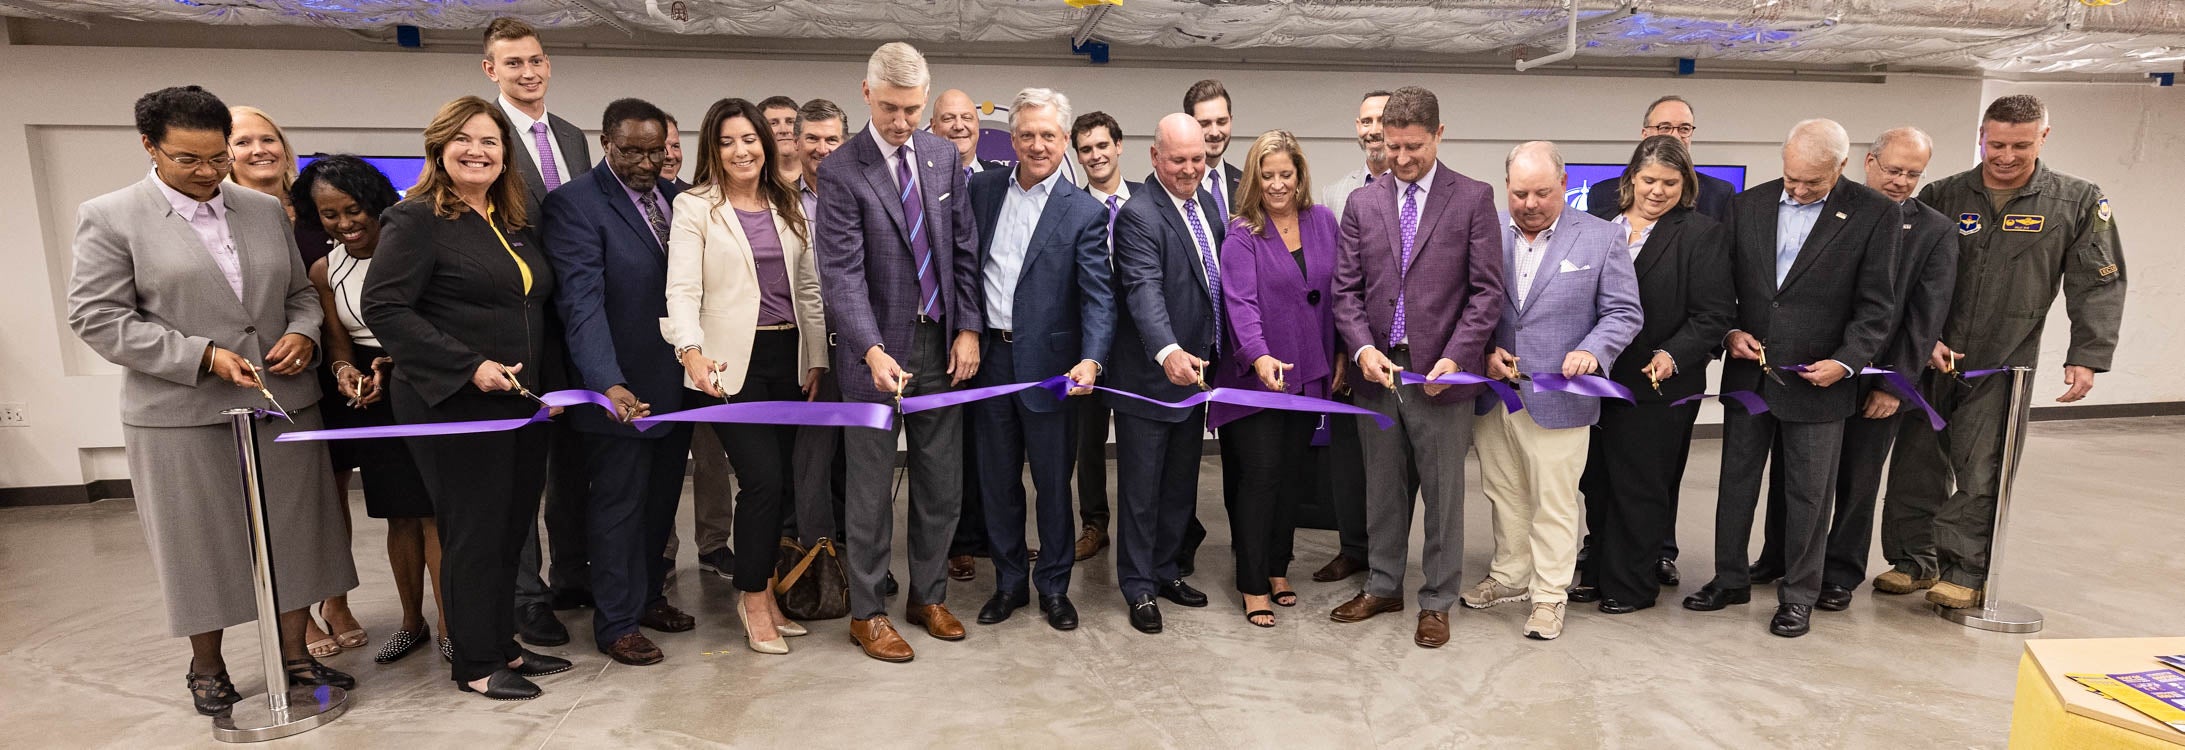 ECU leaders and BOT cut a ribbon to officially open the Isley Innovation Hub